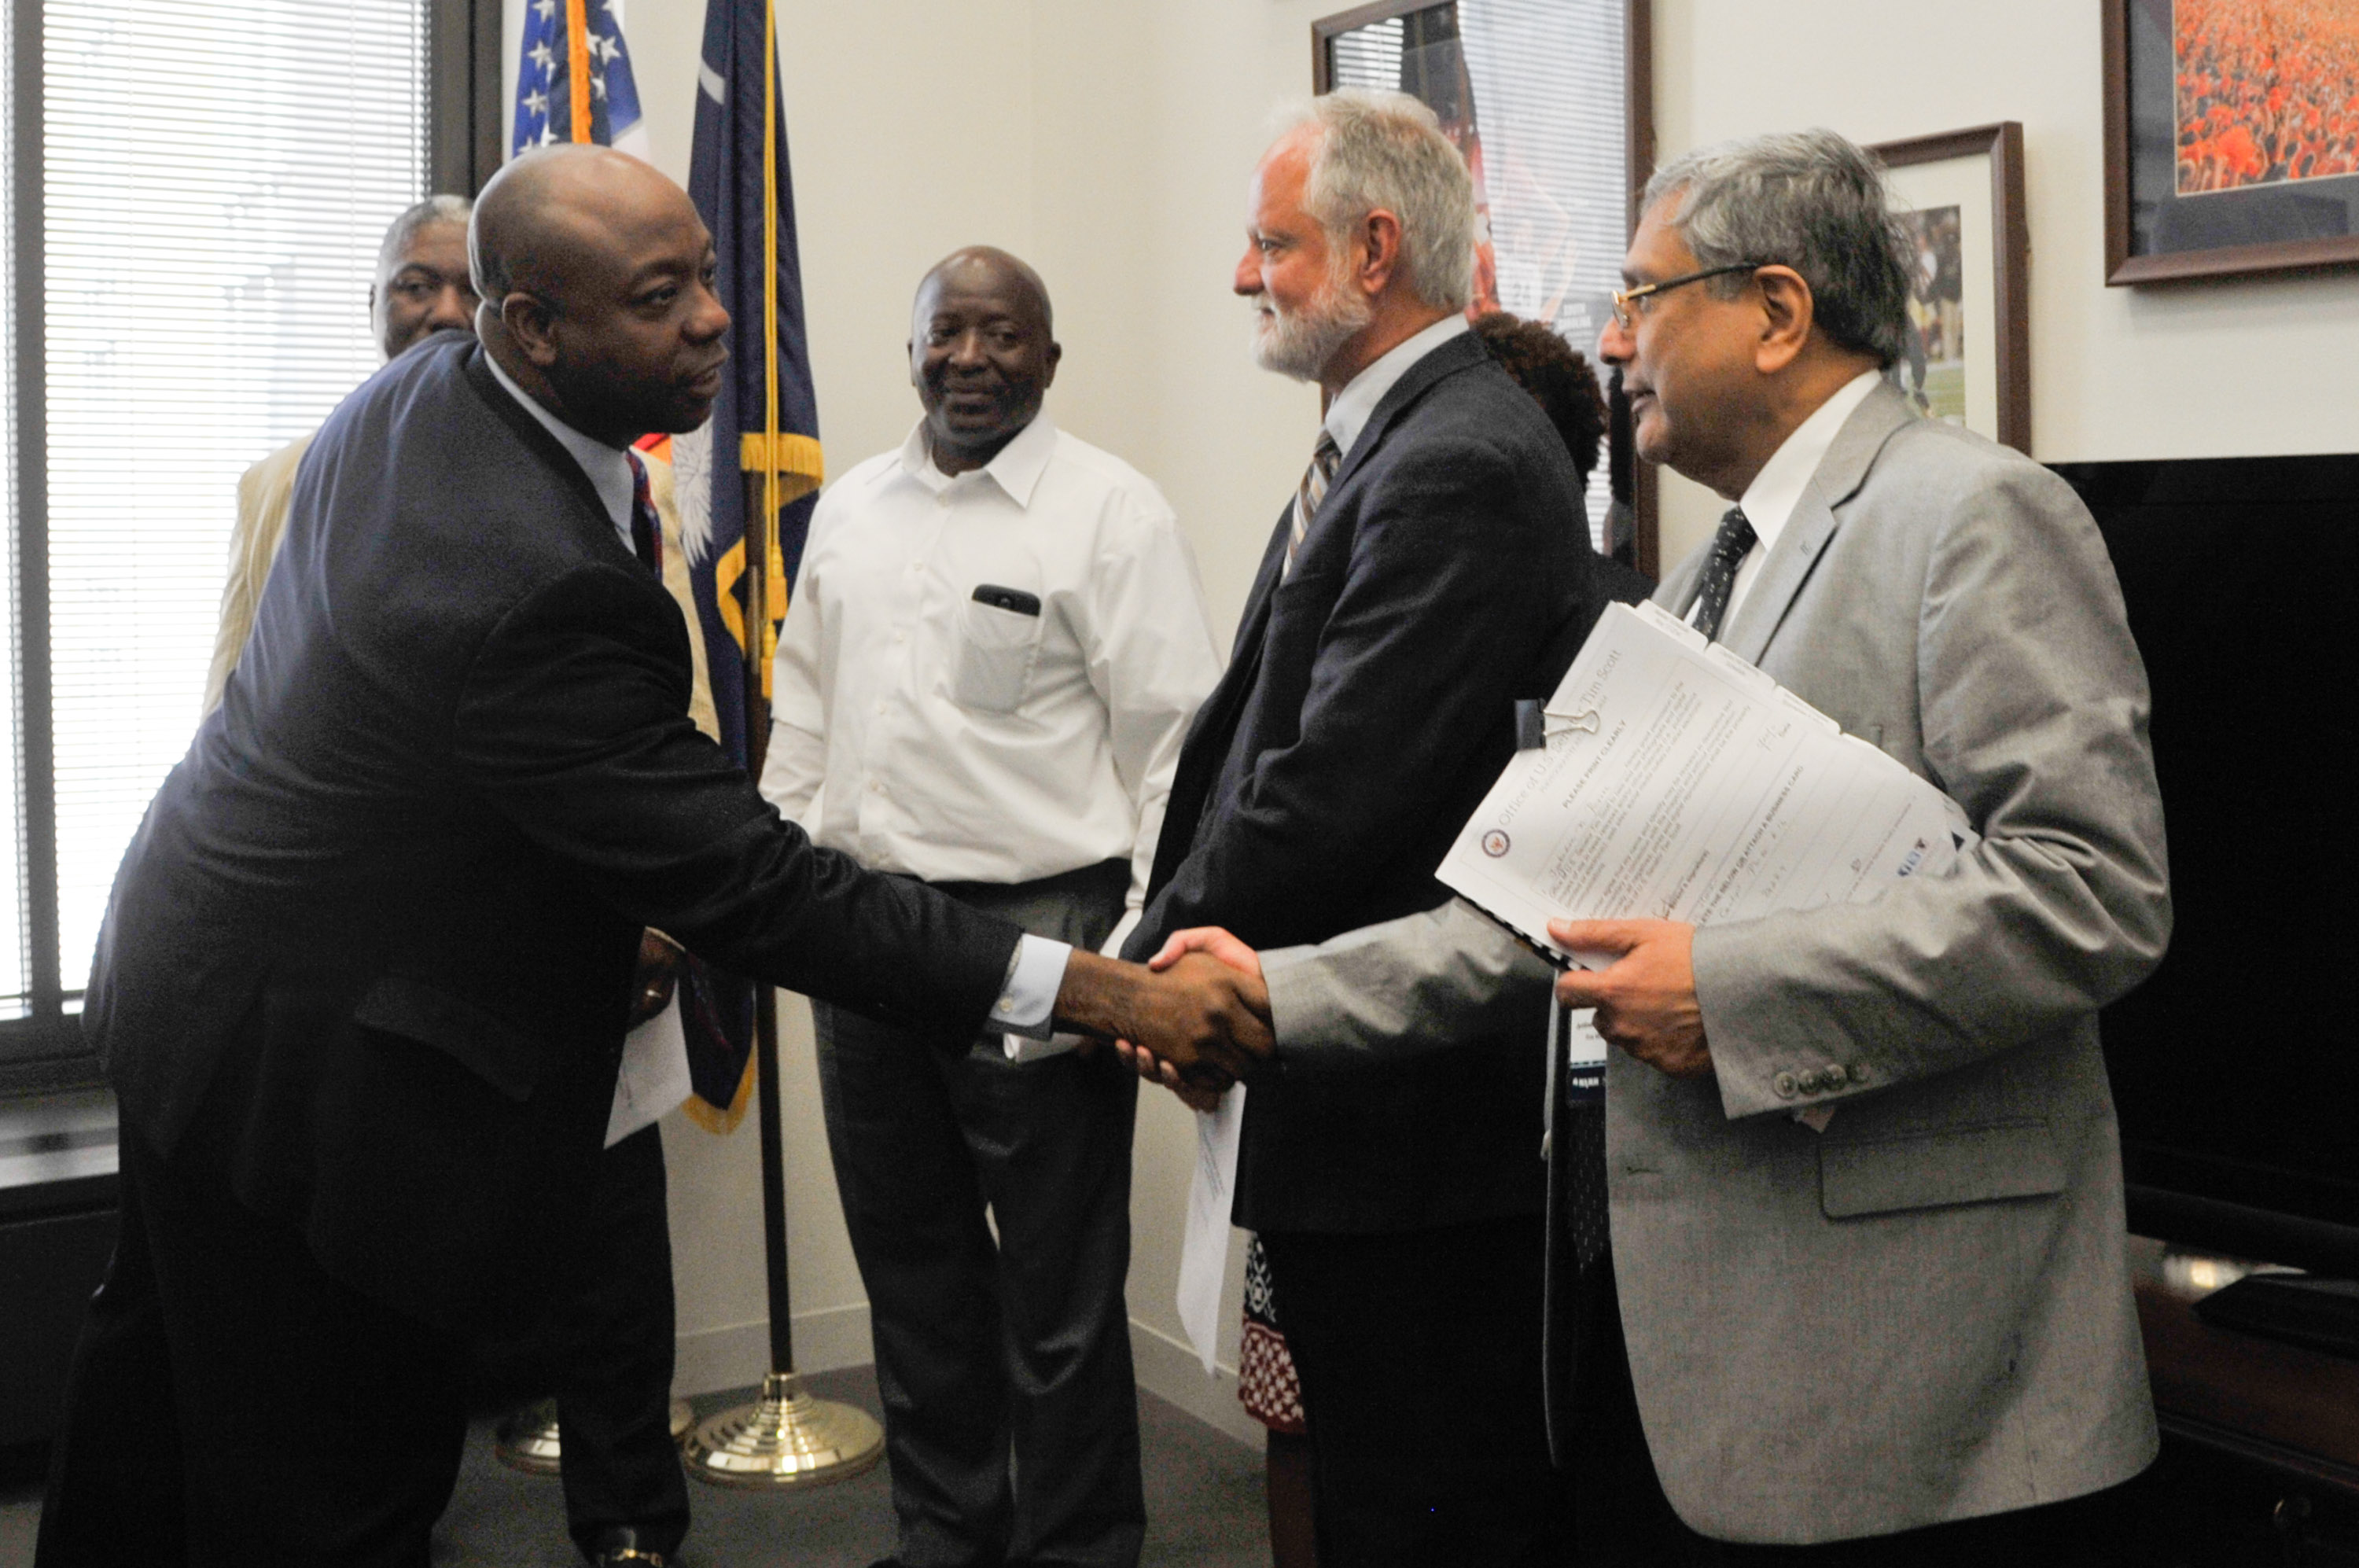 NAMM members meet with Sen. Tim Scott and his staff in the Hart Senate Office Building.